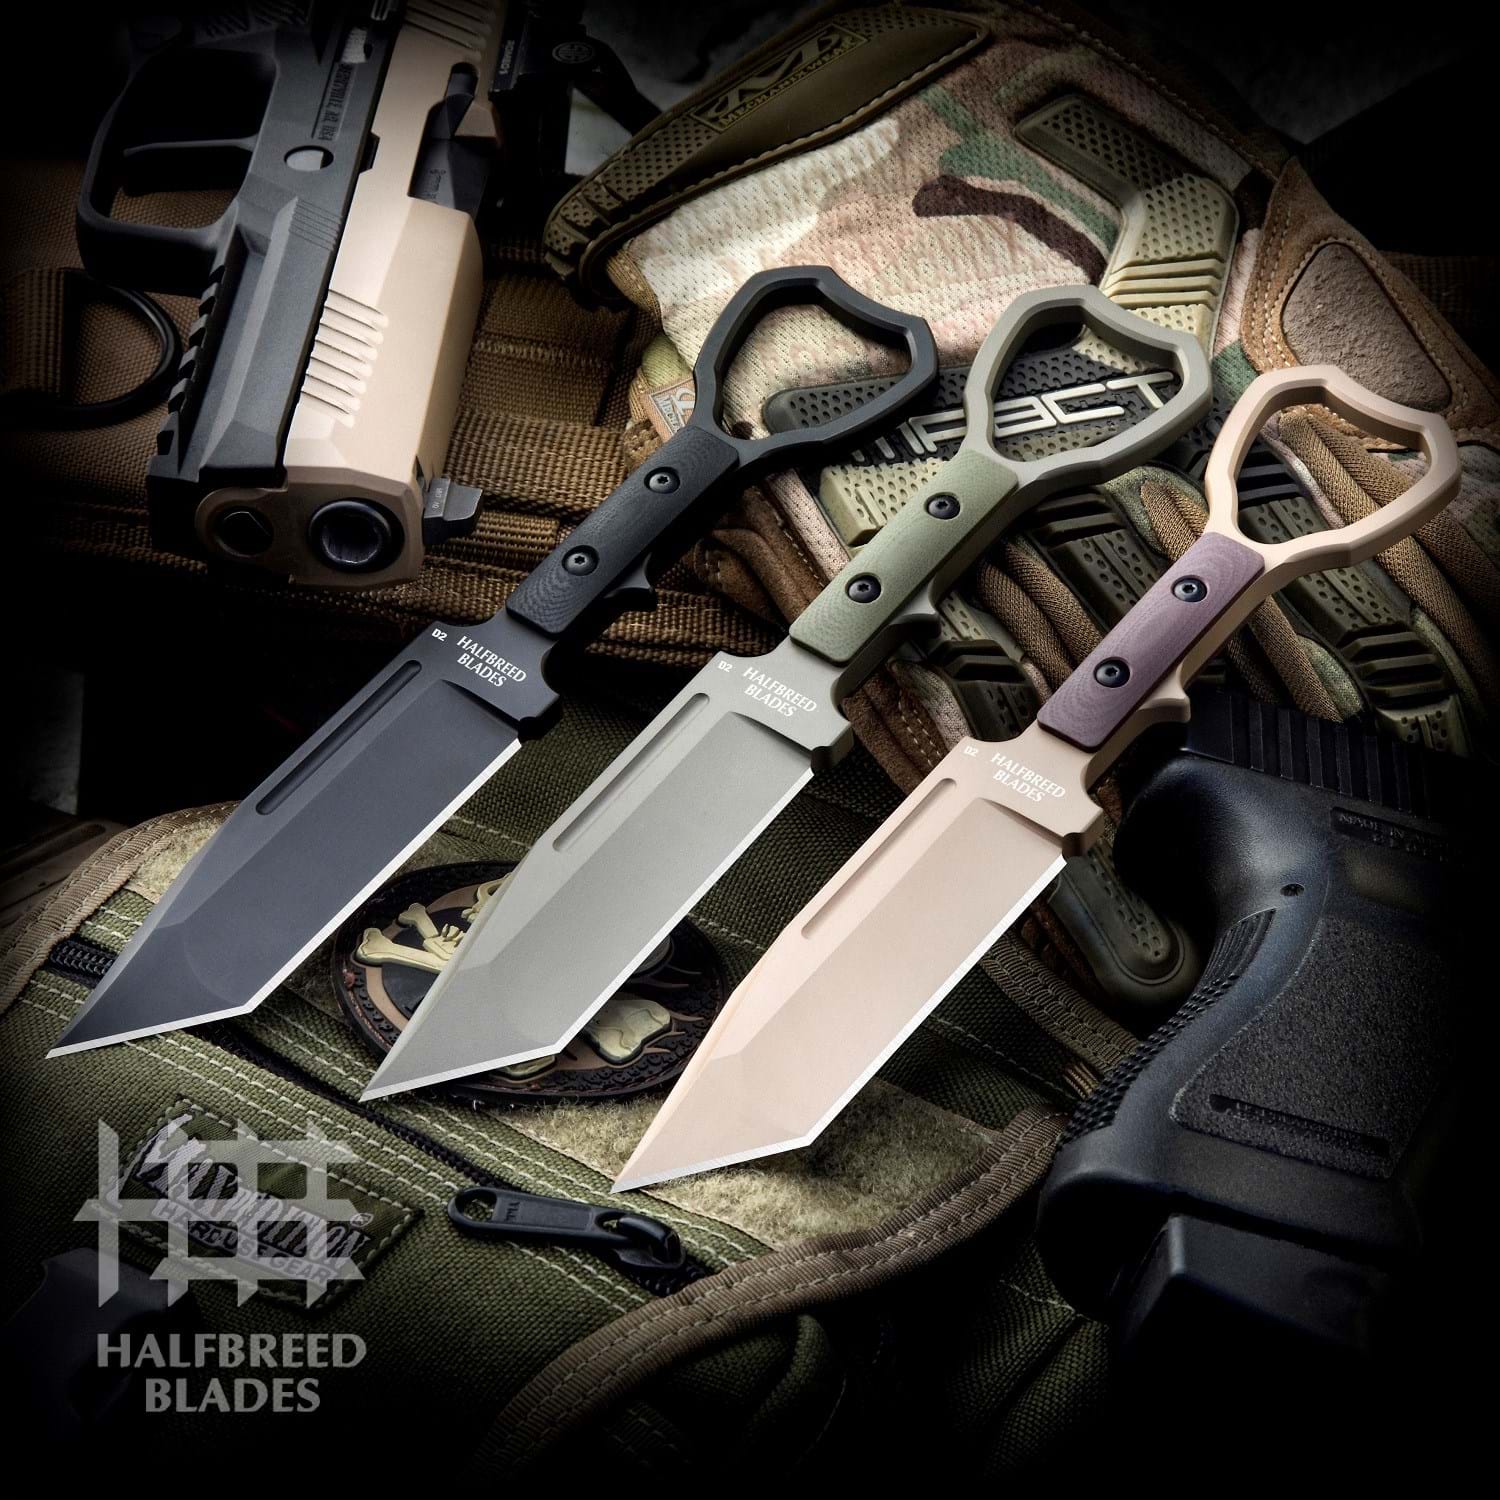 Halfbreed Blades Compact Clearance Fixed Blade Knife and Trainer Set 3.94  D2 Dark Earth Teflon Tanto Blade, G10 Handles, Injection Molded Sheath -  KnifeCenter - CCK-02 BUNDLE